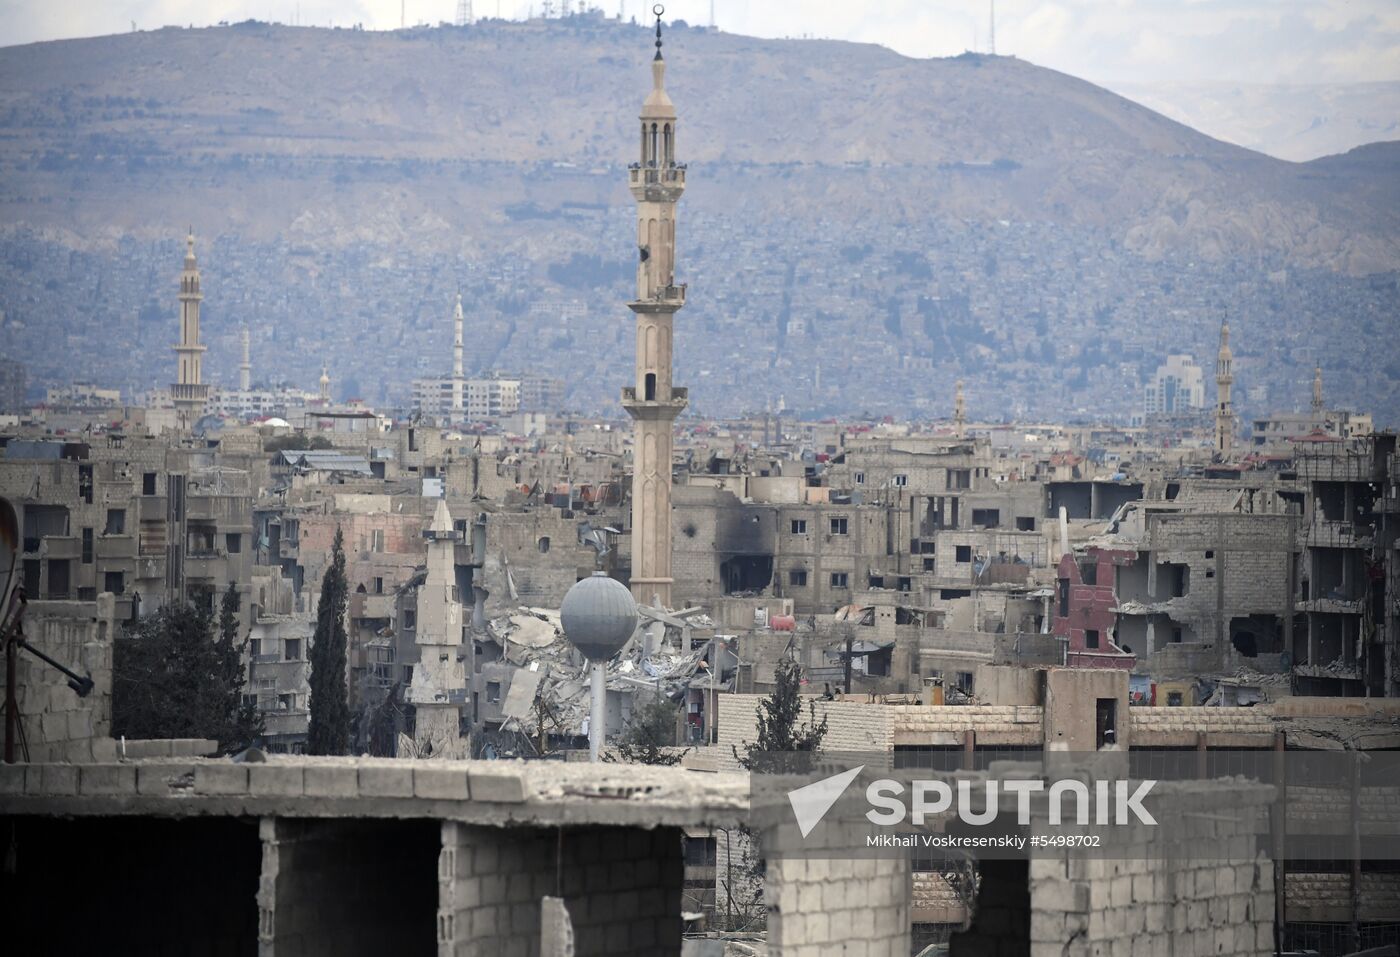 Update from Yarmouk refugee camp area in southern suburb of Damascus